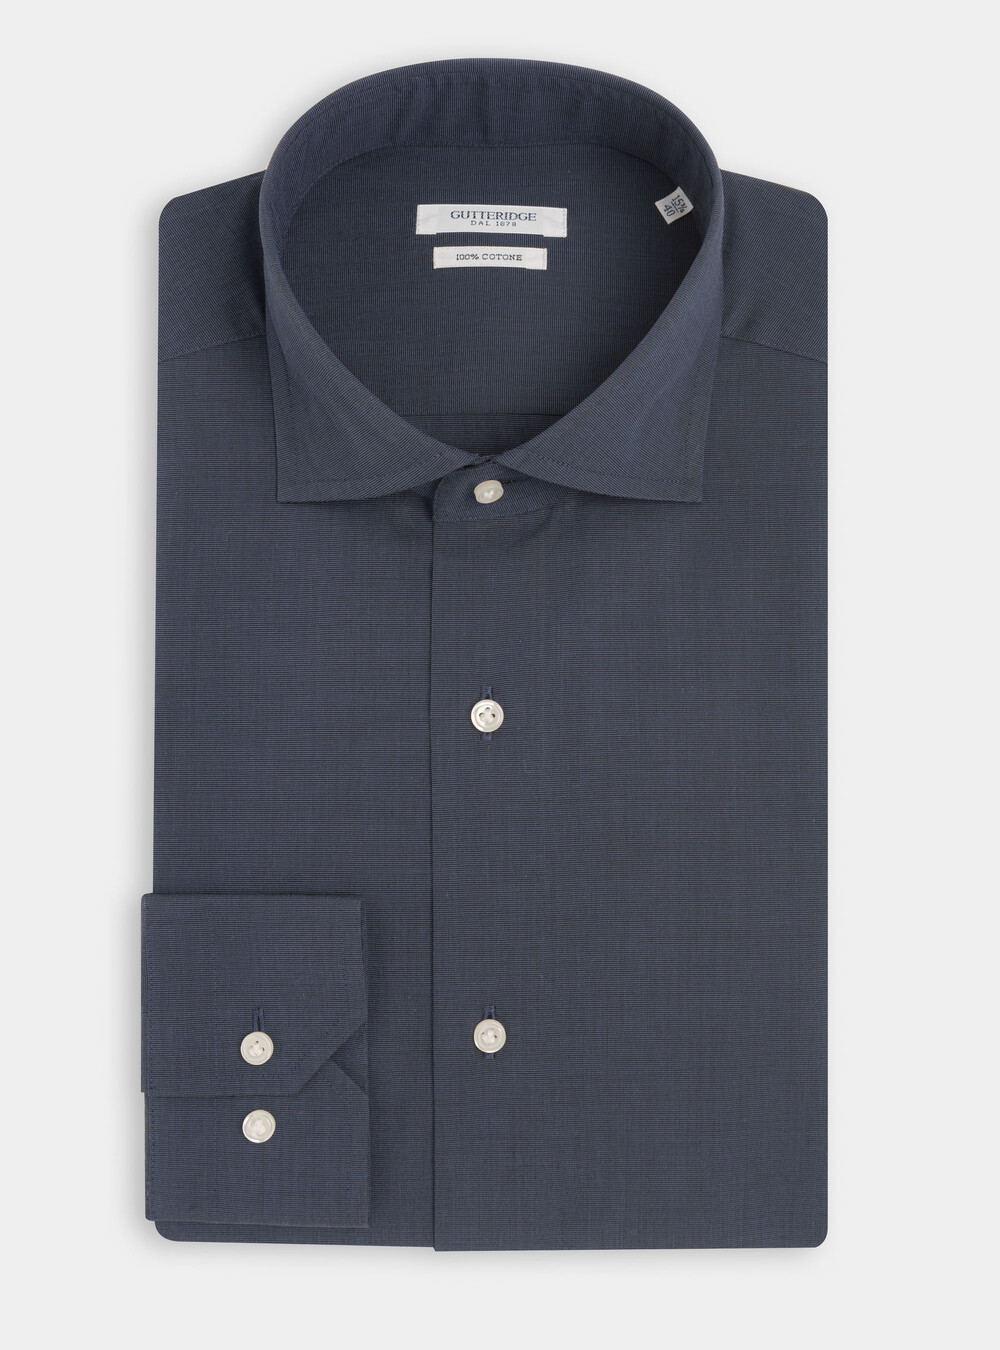 Men's Gutteridge Shirts | Elegant and casual. Discover them now